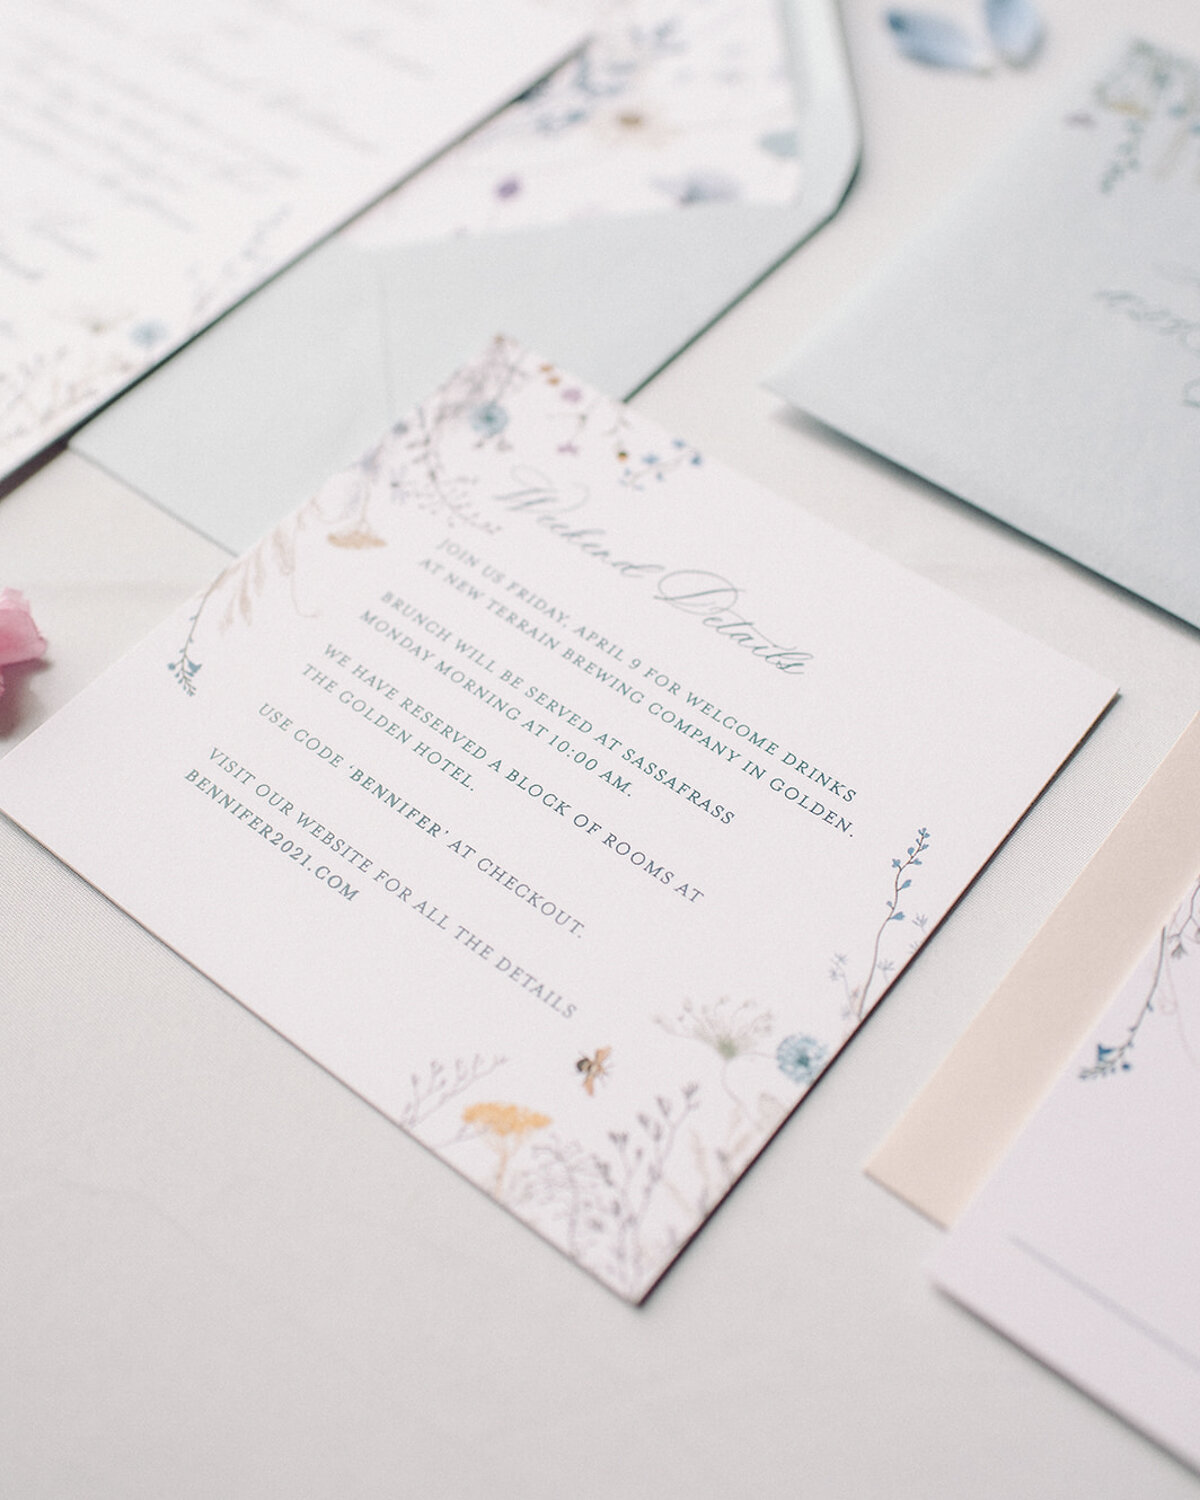 Your enclosure card can include additional details for your wedding that your guests need to know.